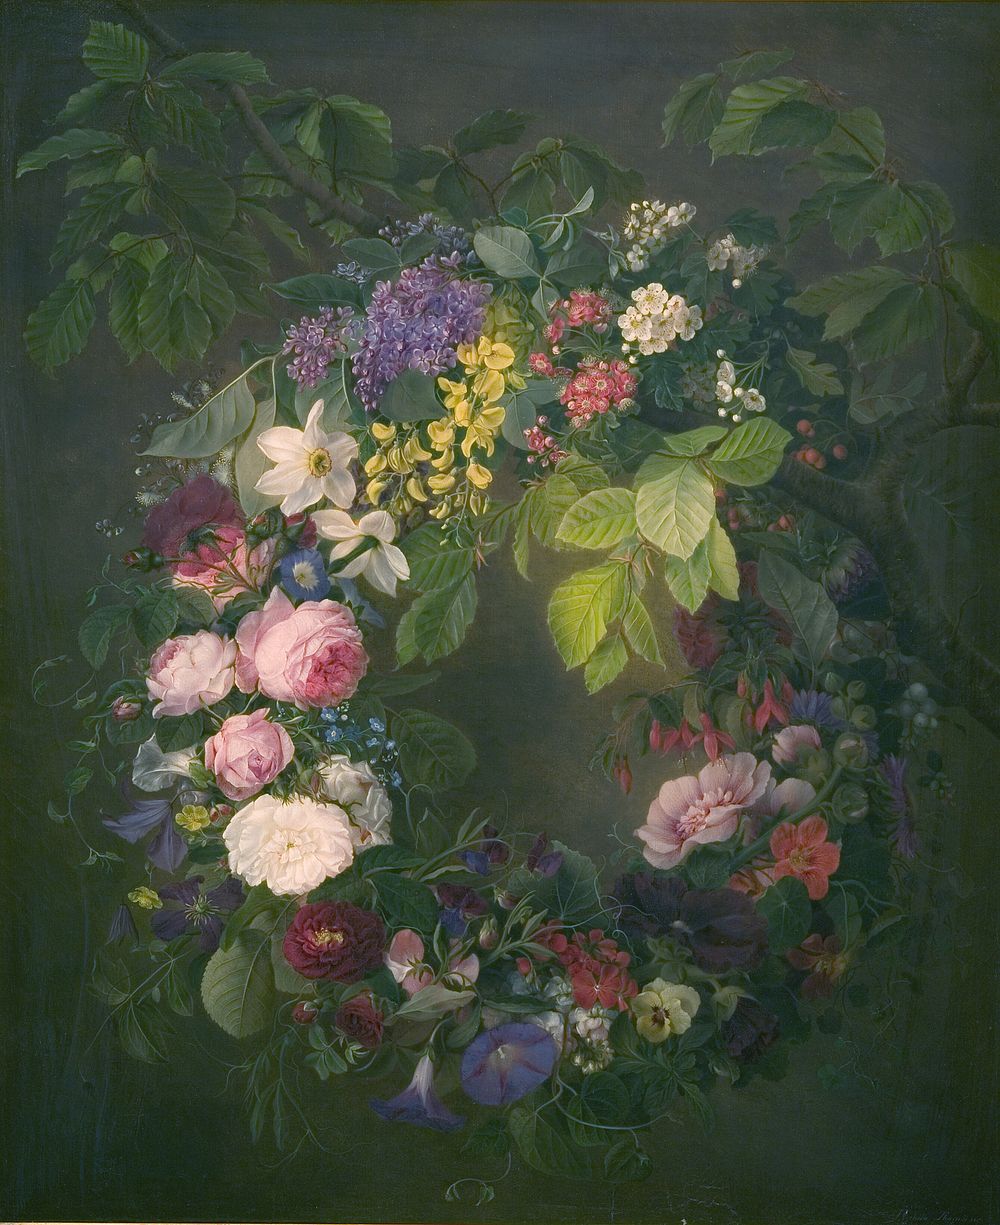 A wreath of flowers by Emma Thomsen